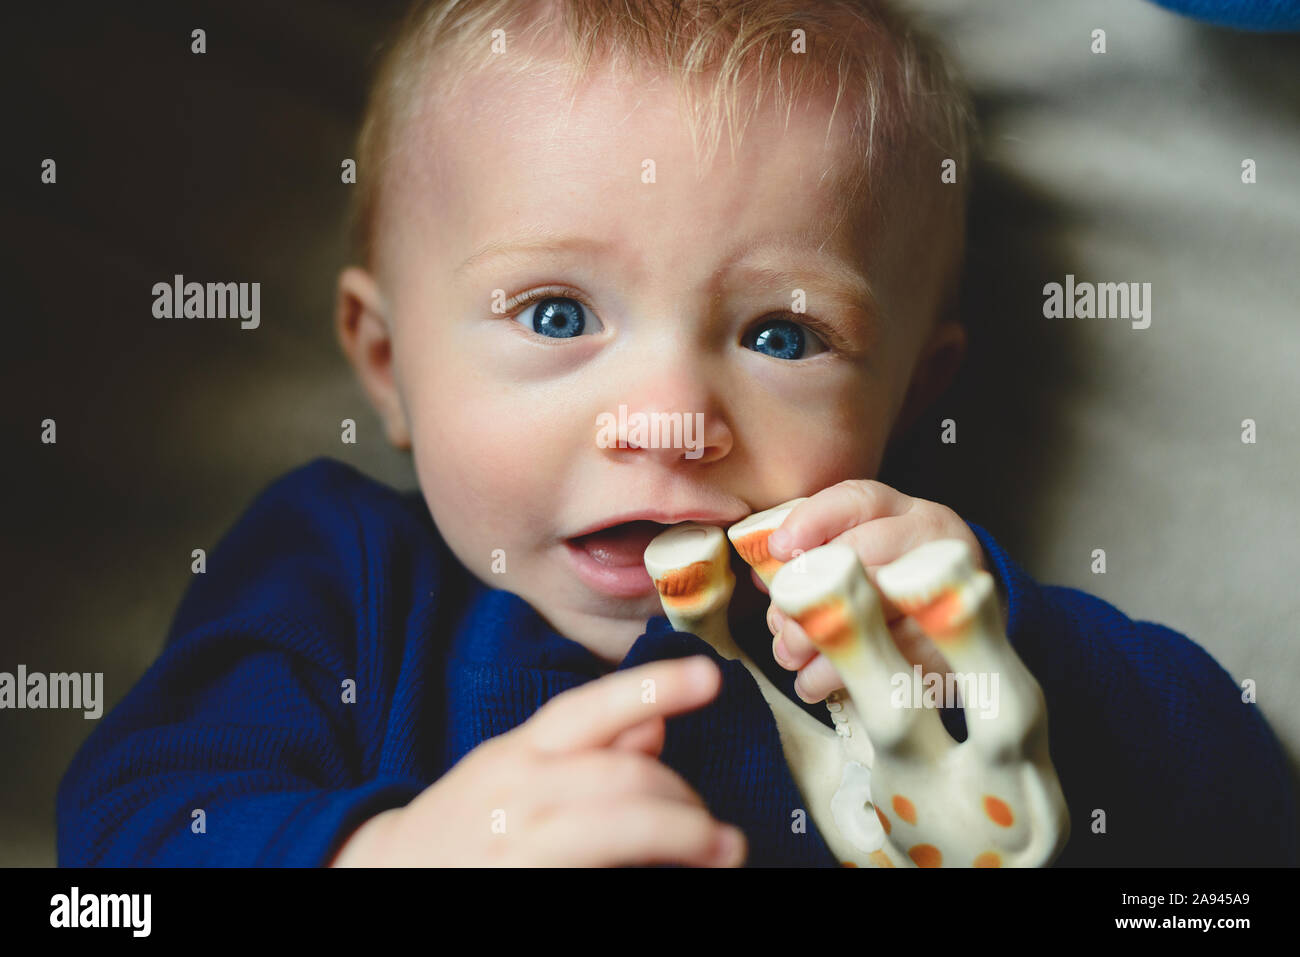 A baby boy chews on a toy. Stock Photo